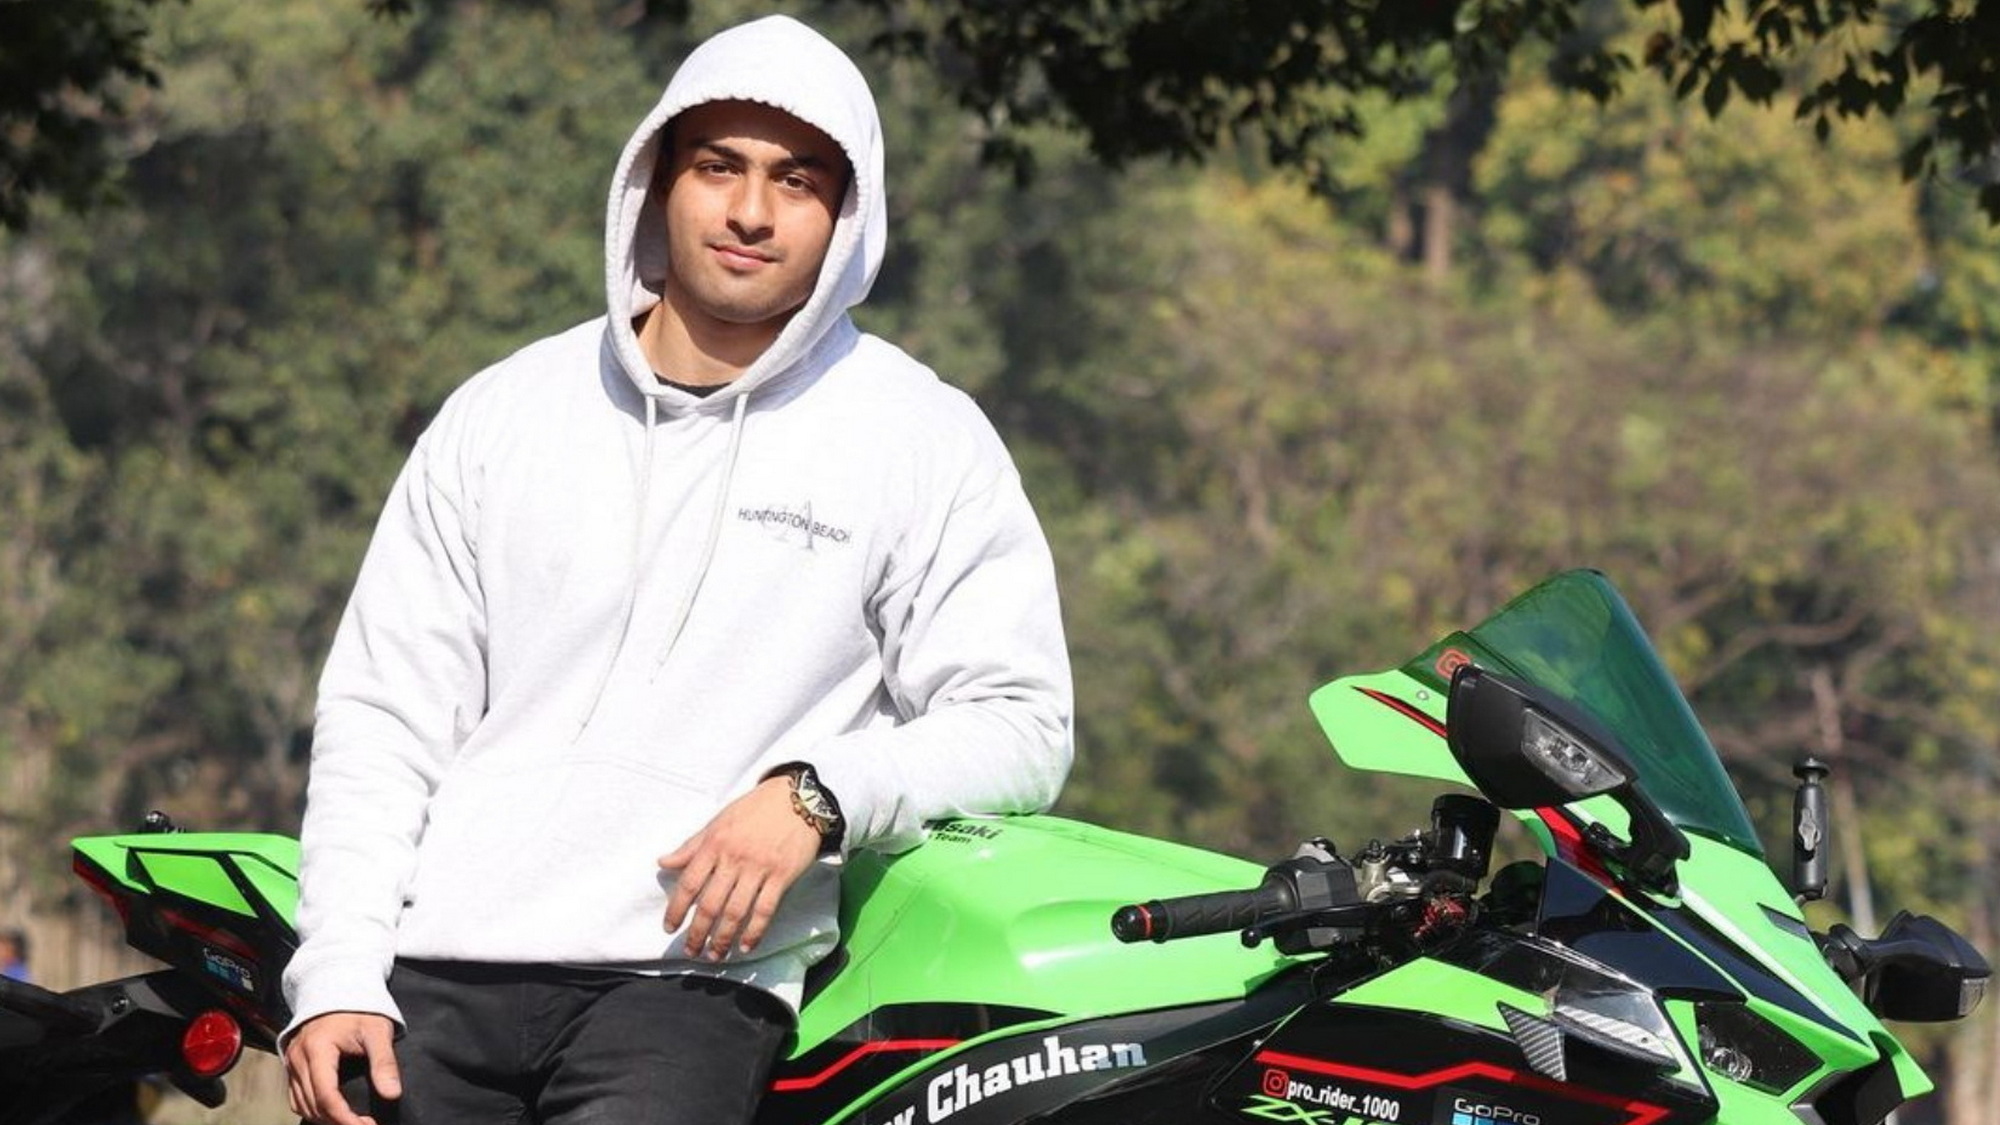 r Agastay Chauhan Dies In Superbike Crash Attempting To Hit